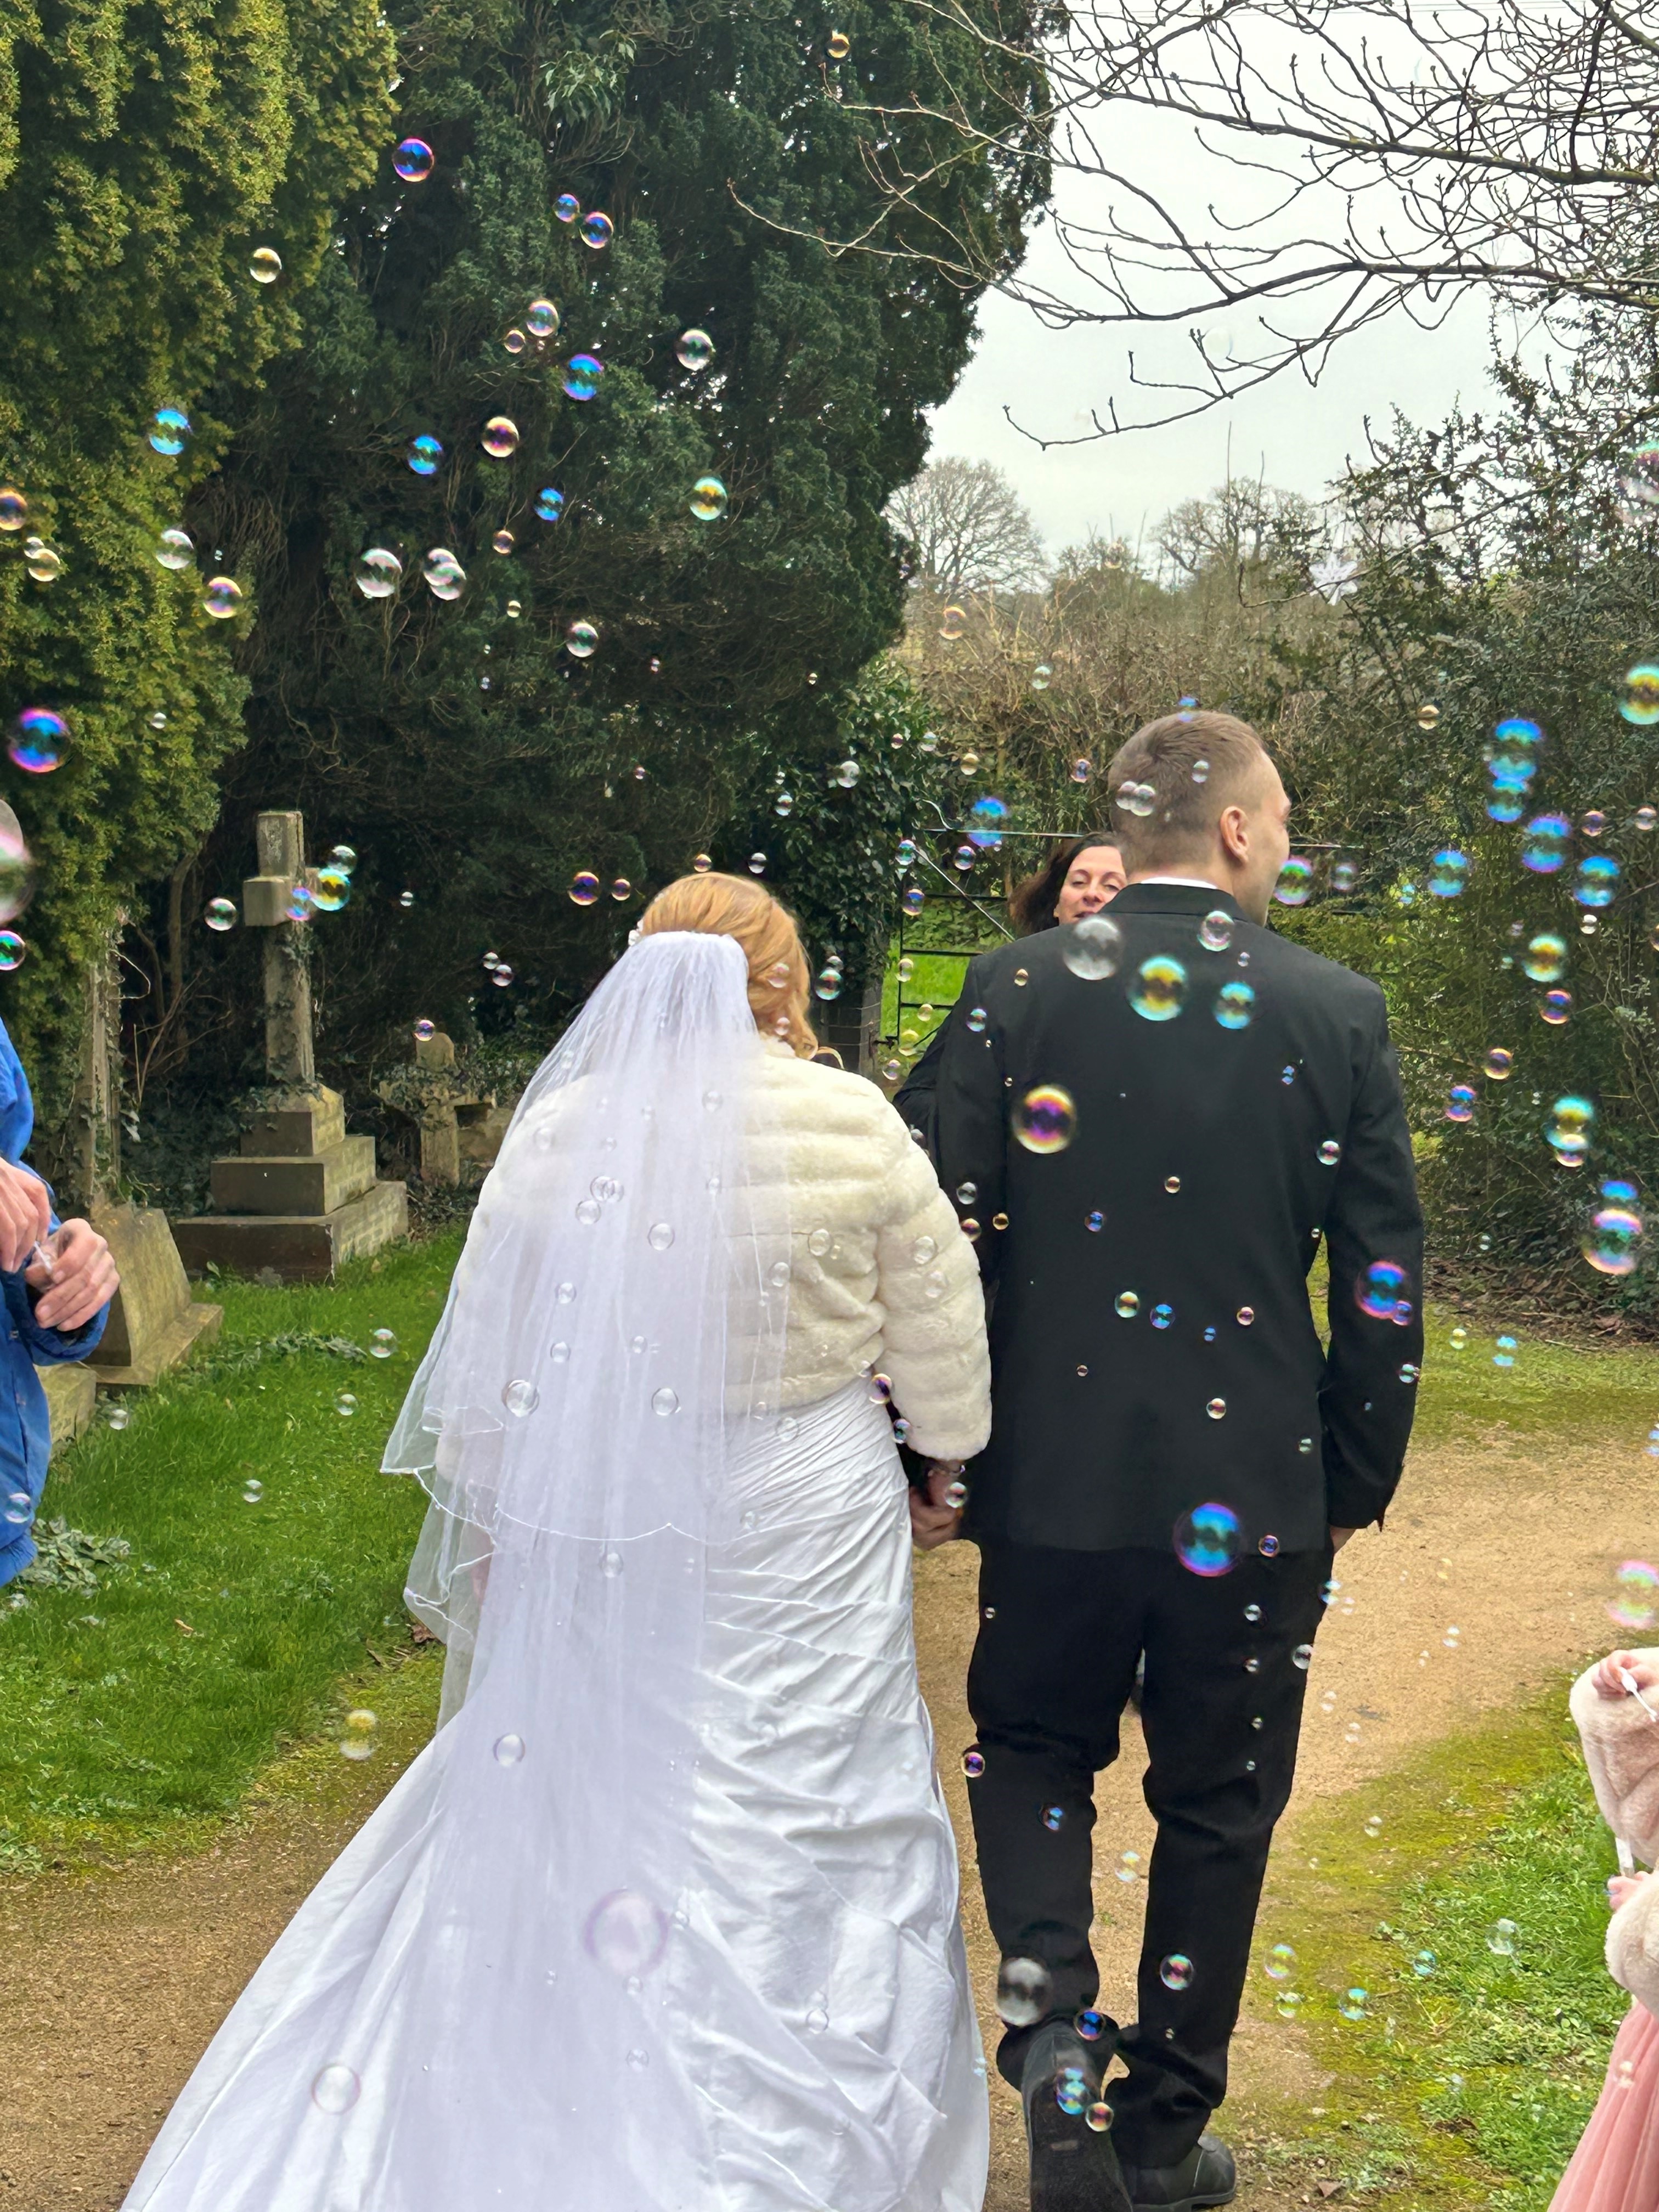 A wedding couple walking down a church path with bubbles